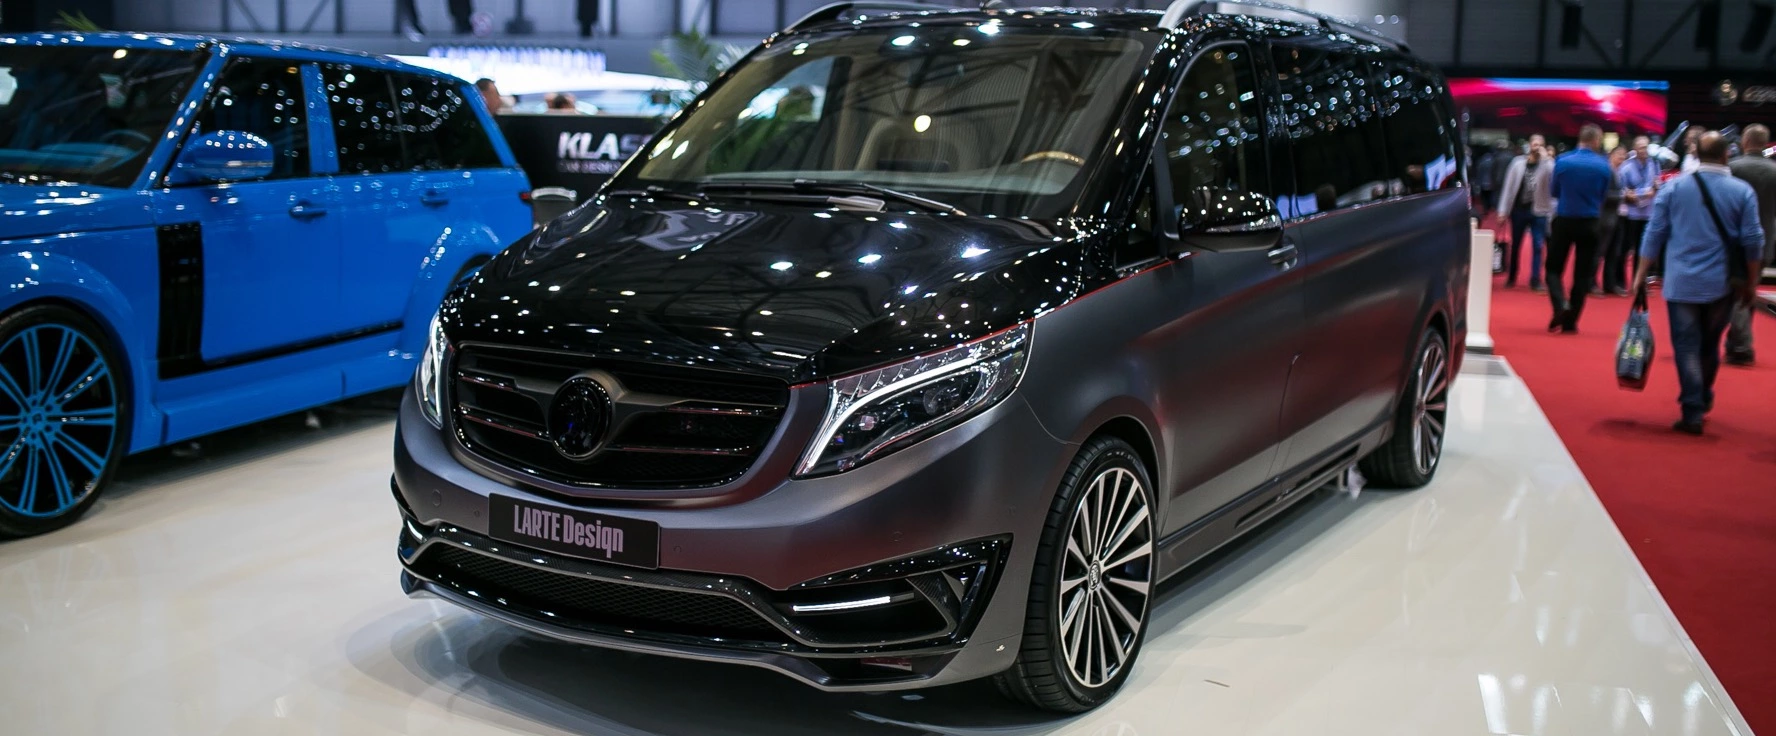 Mercedes Benz V class with carbon fiber widebody kit